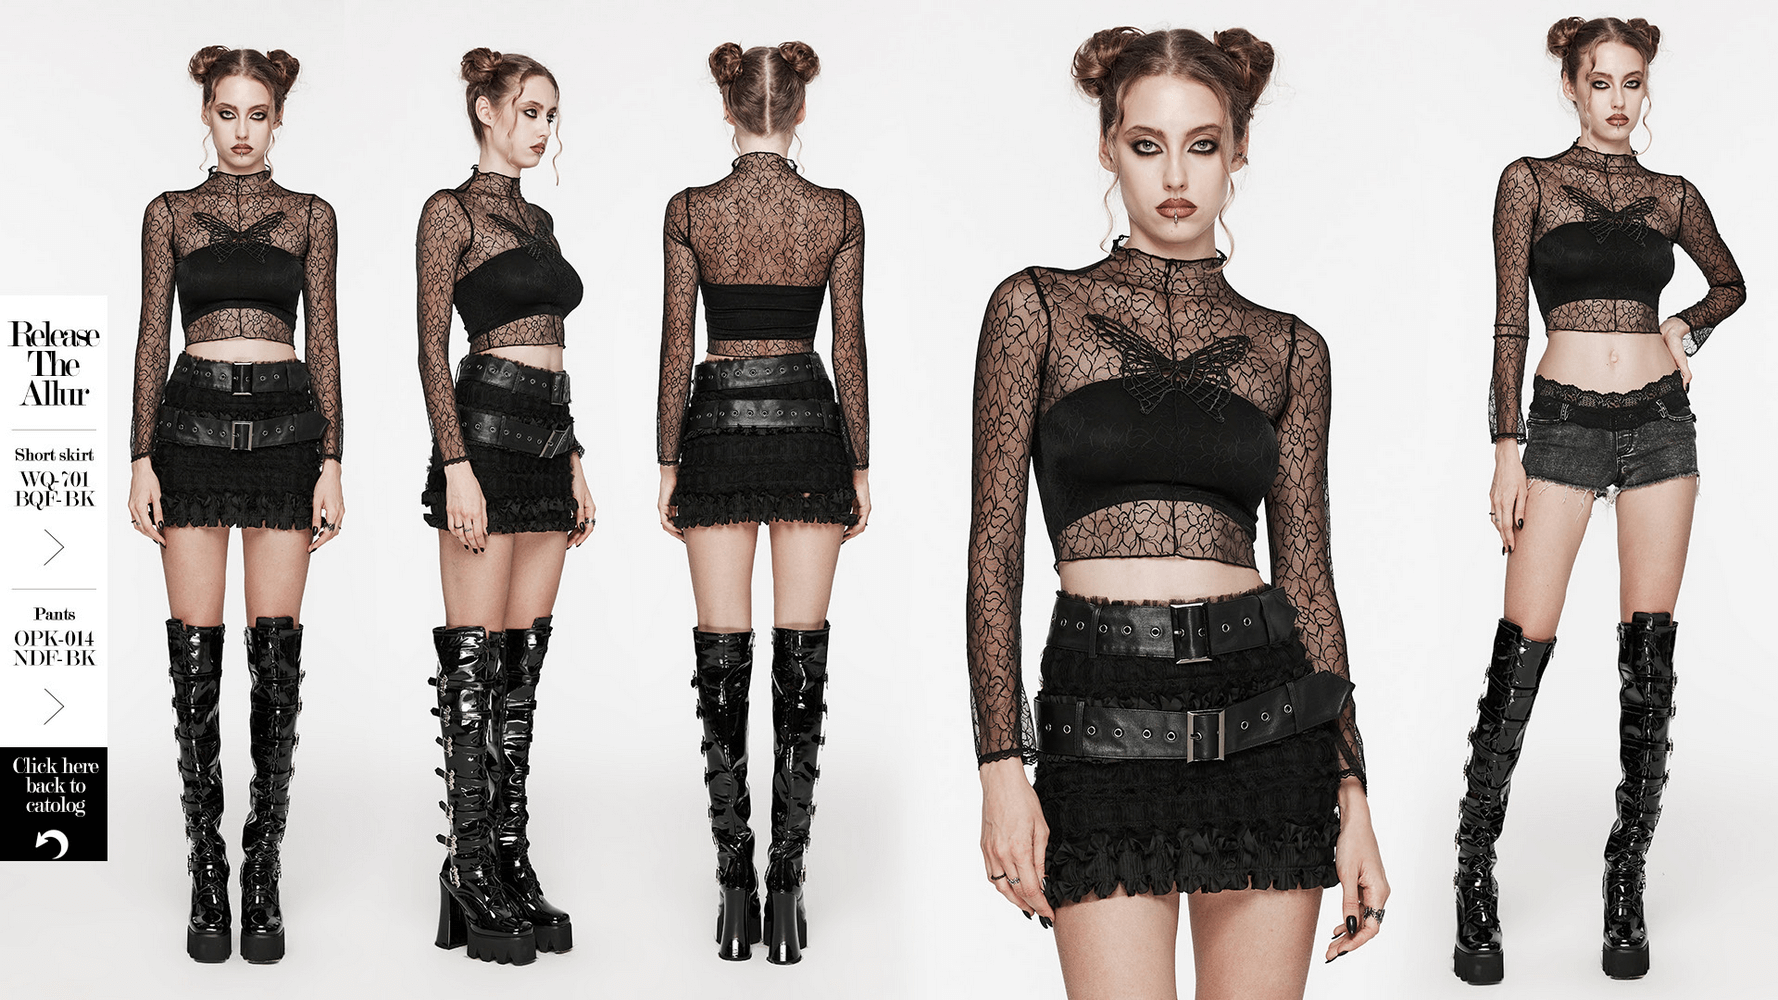 Black Gothic Mesh Butterfly Long Sleeve Crop Top